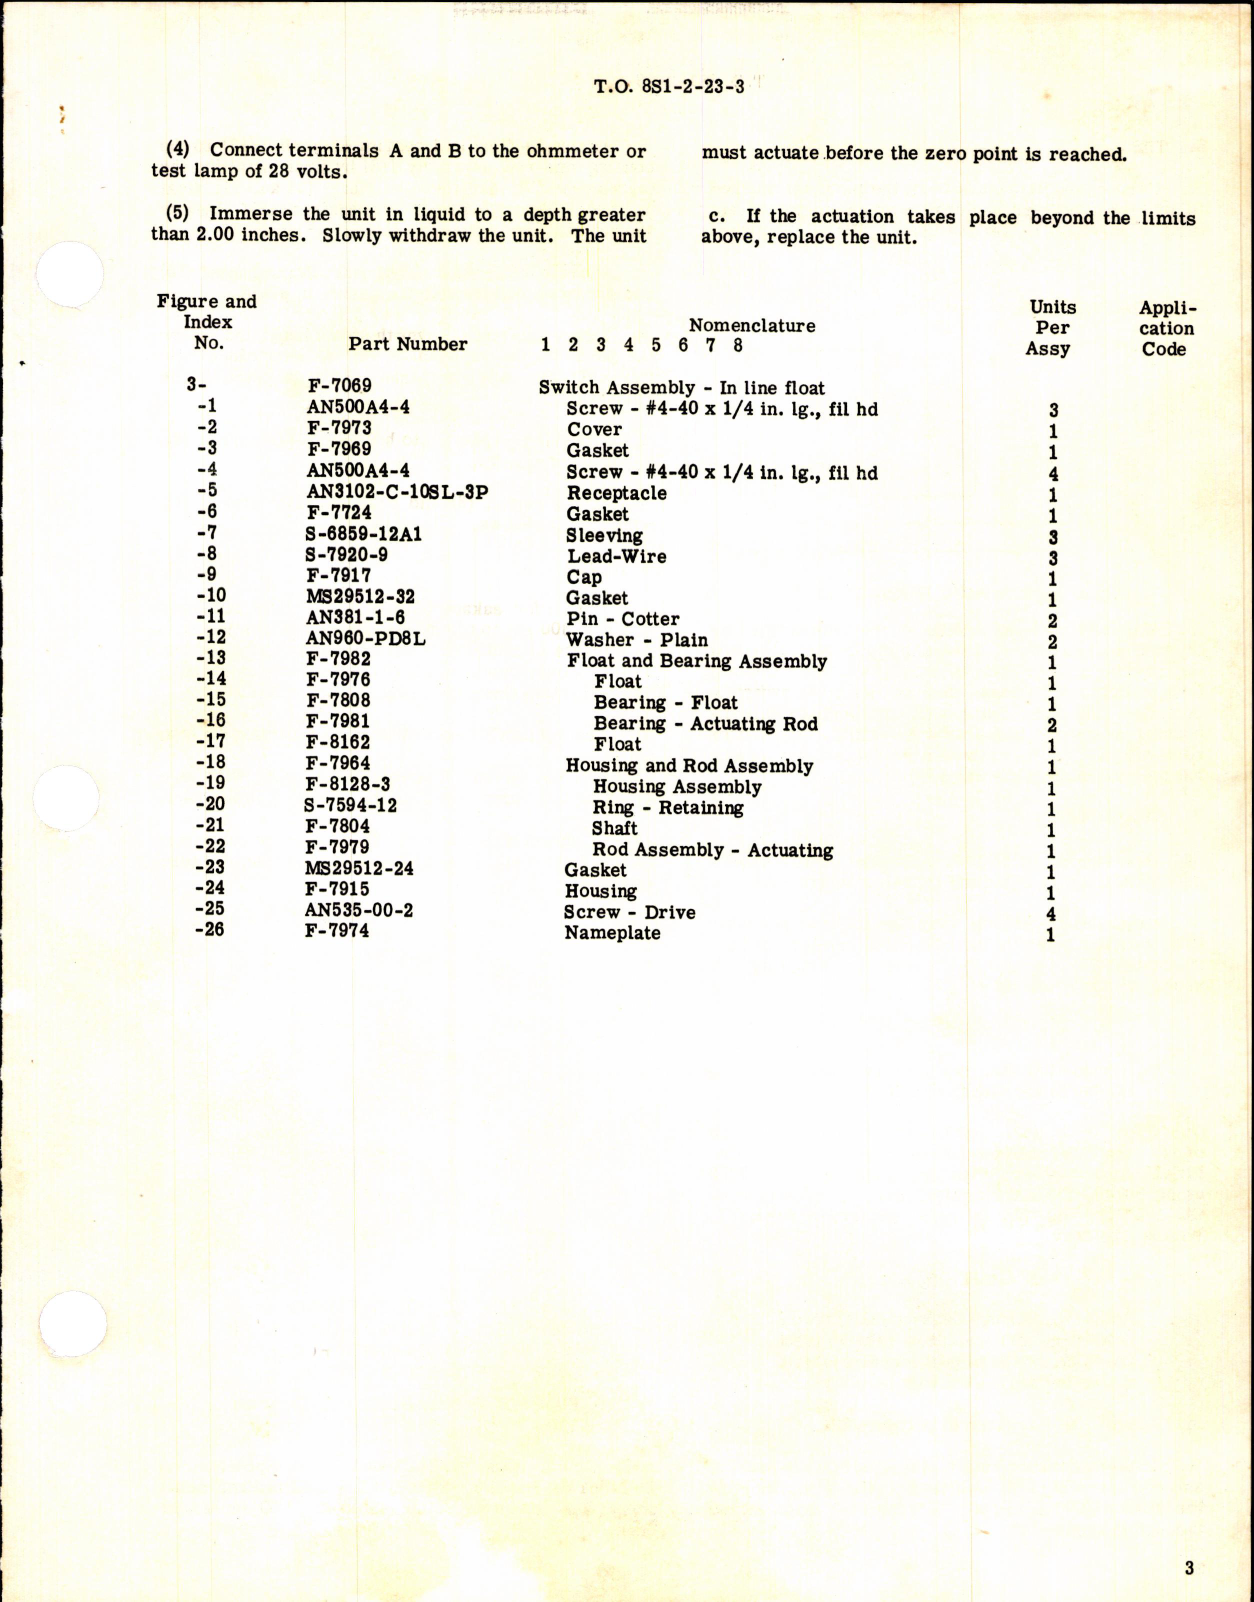 Sample page 3 from AirCorps Library document: Switch Assembly, In Line Float F-7069